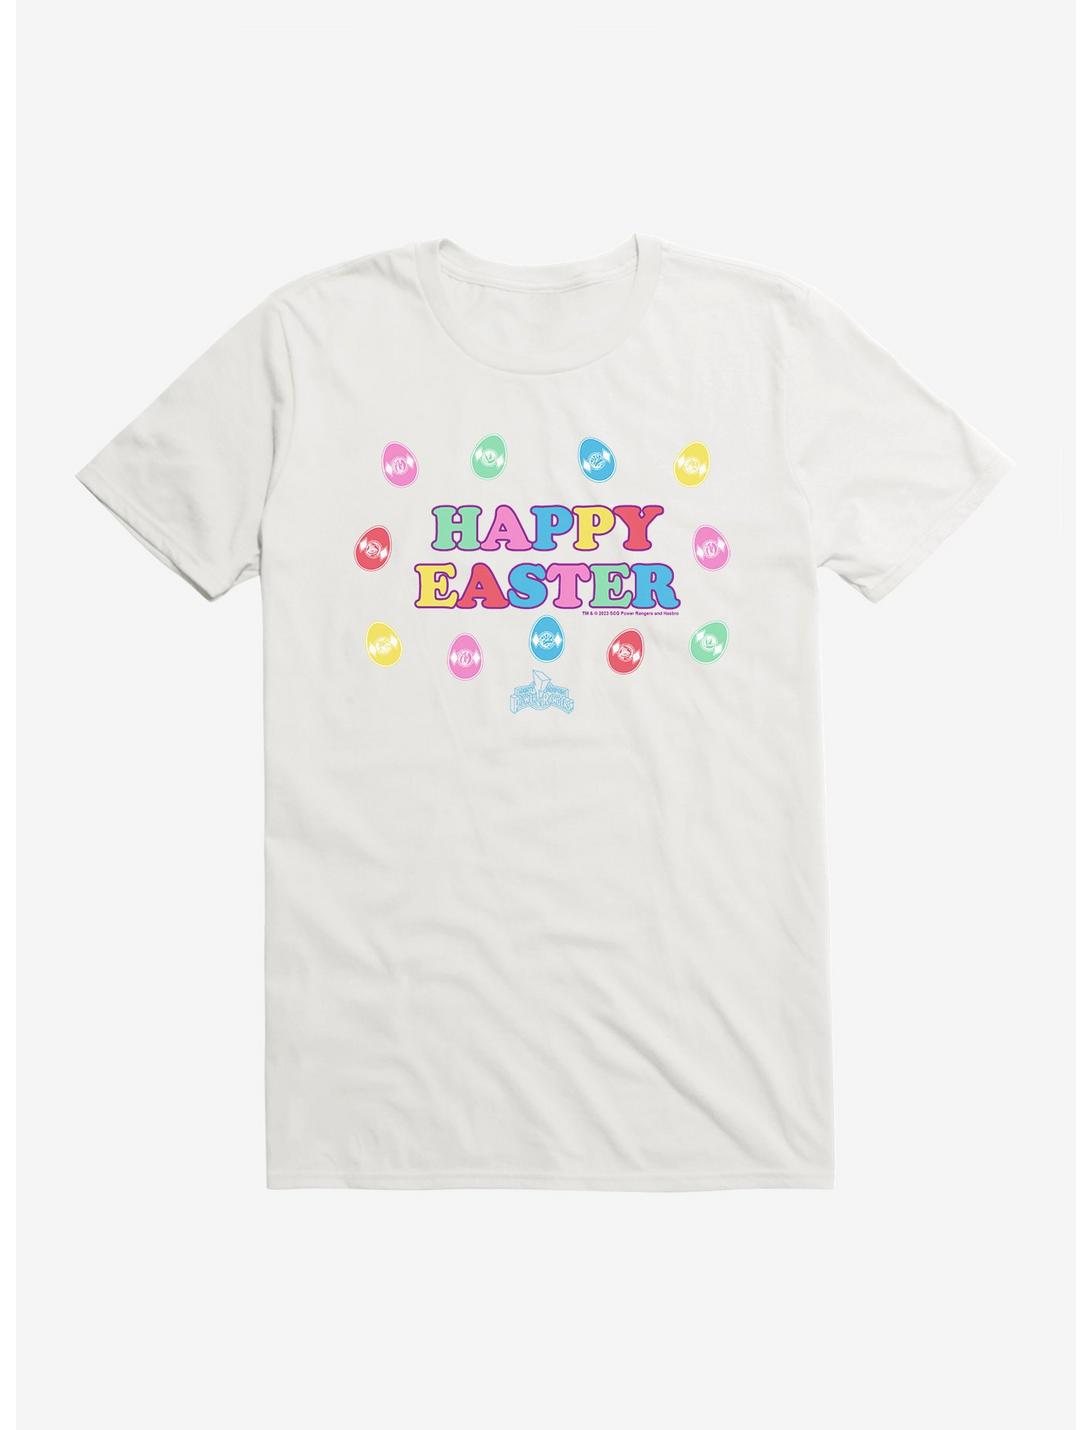 Mighty Morphin Power Rangers Happy Easter T-Shirt, WHITE, hi-res